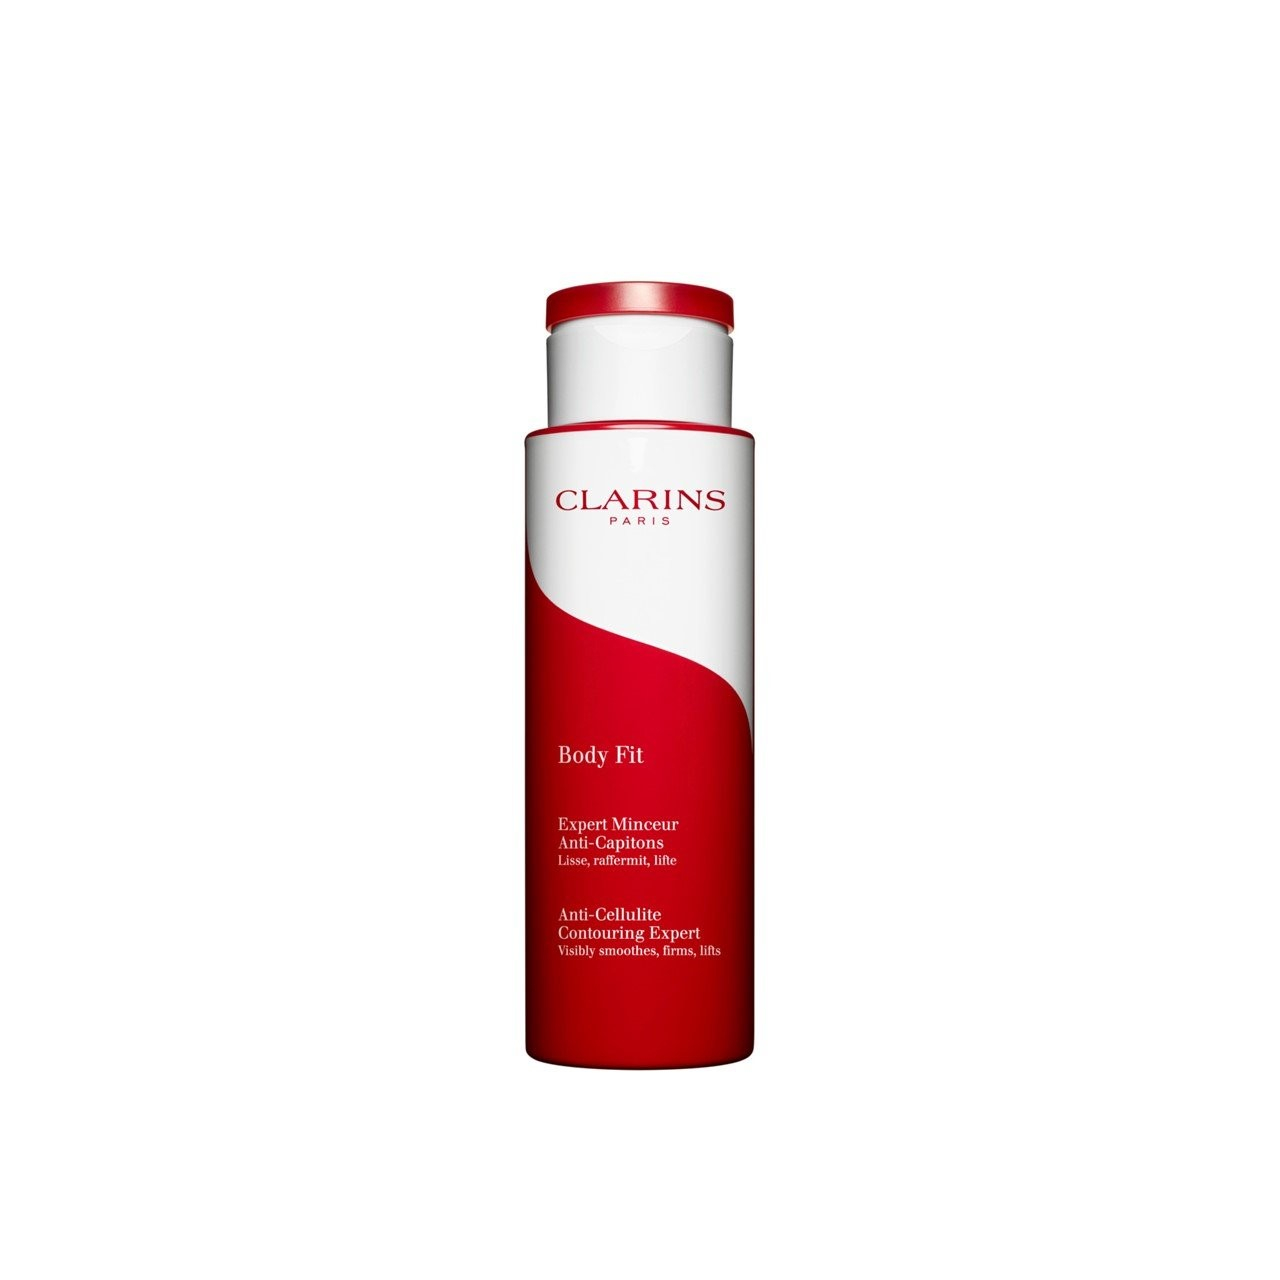 Buy Clarins Body Fit Anti-Cellulite Contouring Expert 200ml (6.76